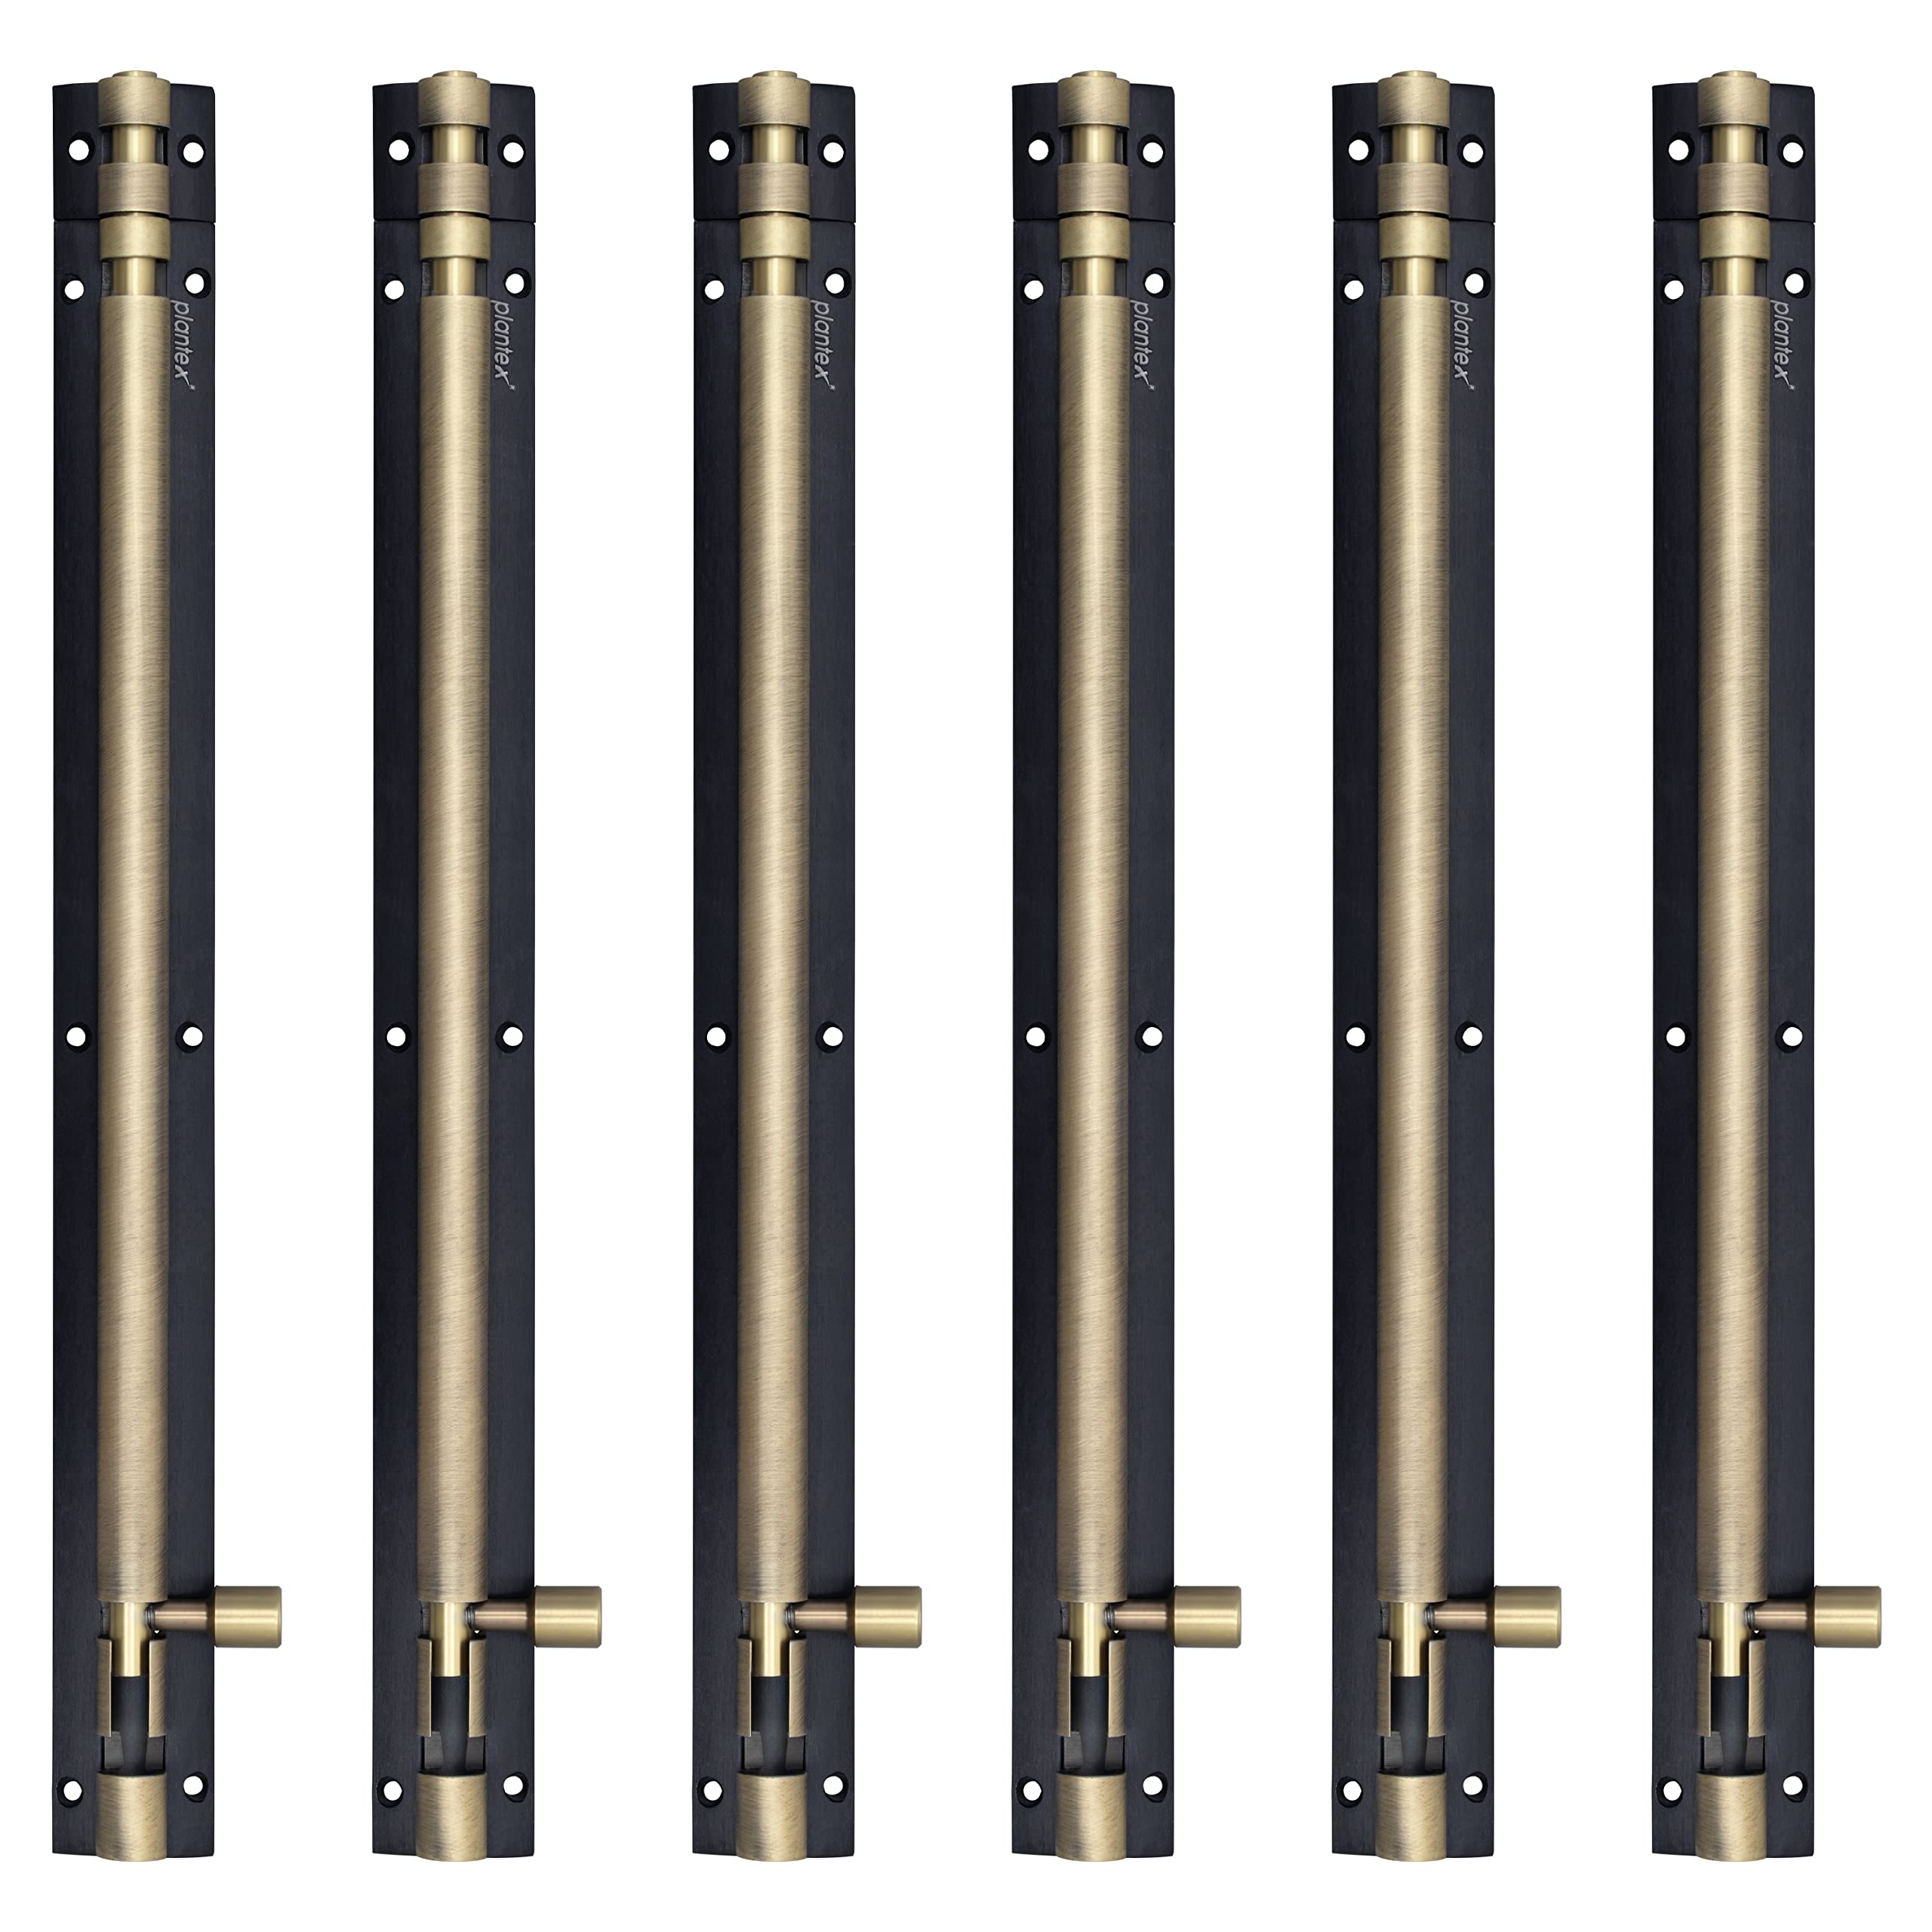 Plantex Heavy Duty 12-inch Joint-Less Tower Bolt for Wooden and PVC Doors for Home Main Door/Bathroom/Windows/Wardrobe - Pack of 6 (703, Brass Antique and Black)